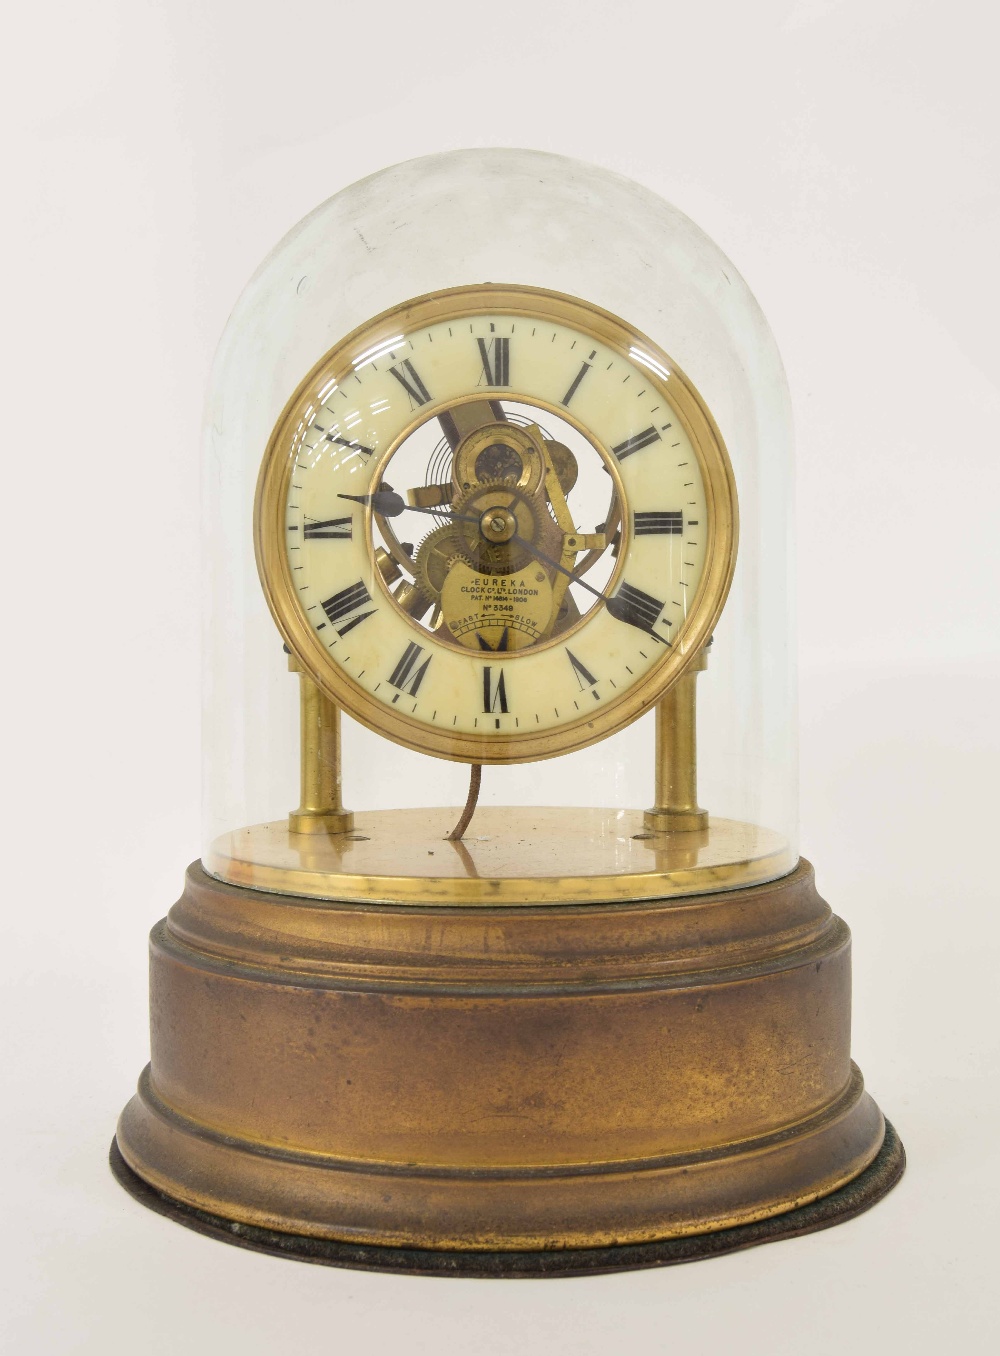 Good Eureka electric mantel clock, the 4.25" cream chapter ring enclosing a skeletonised centre